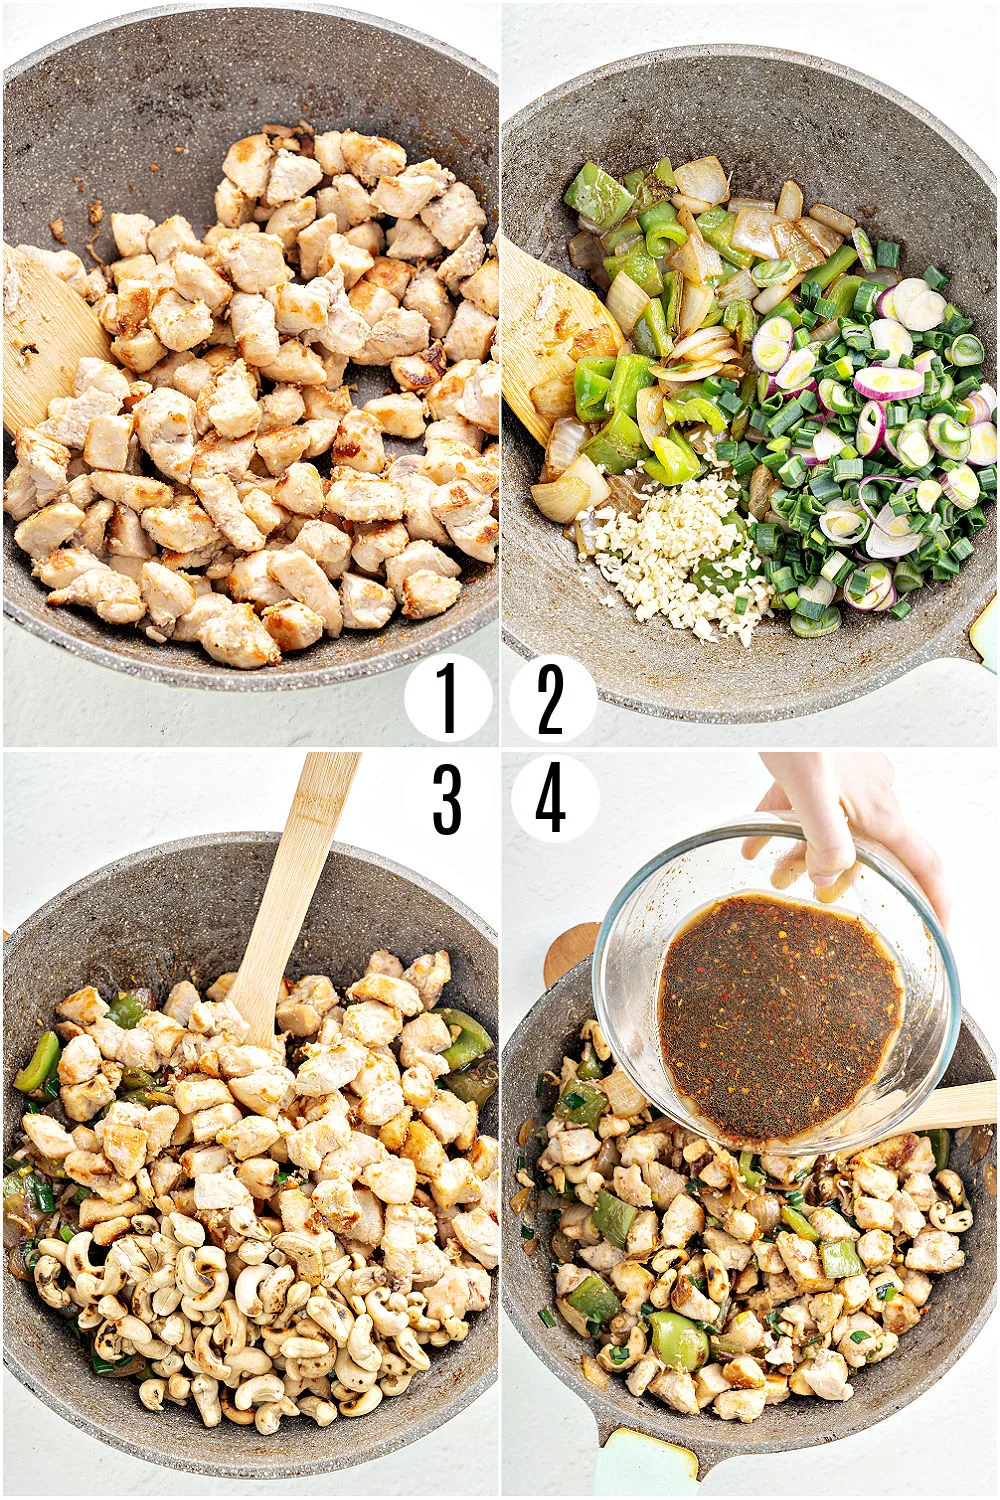 Step by step photos showing how to make gluten free cashew chicken.